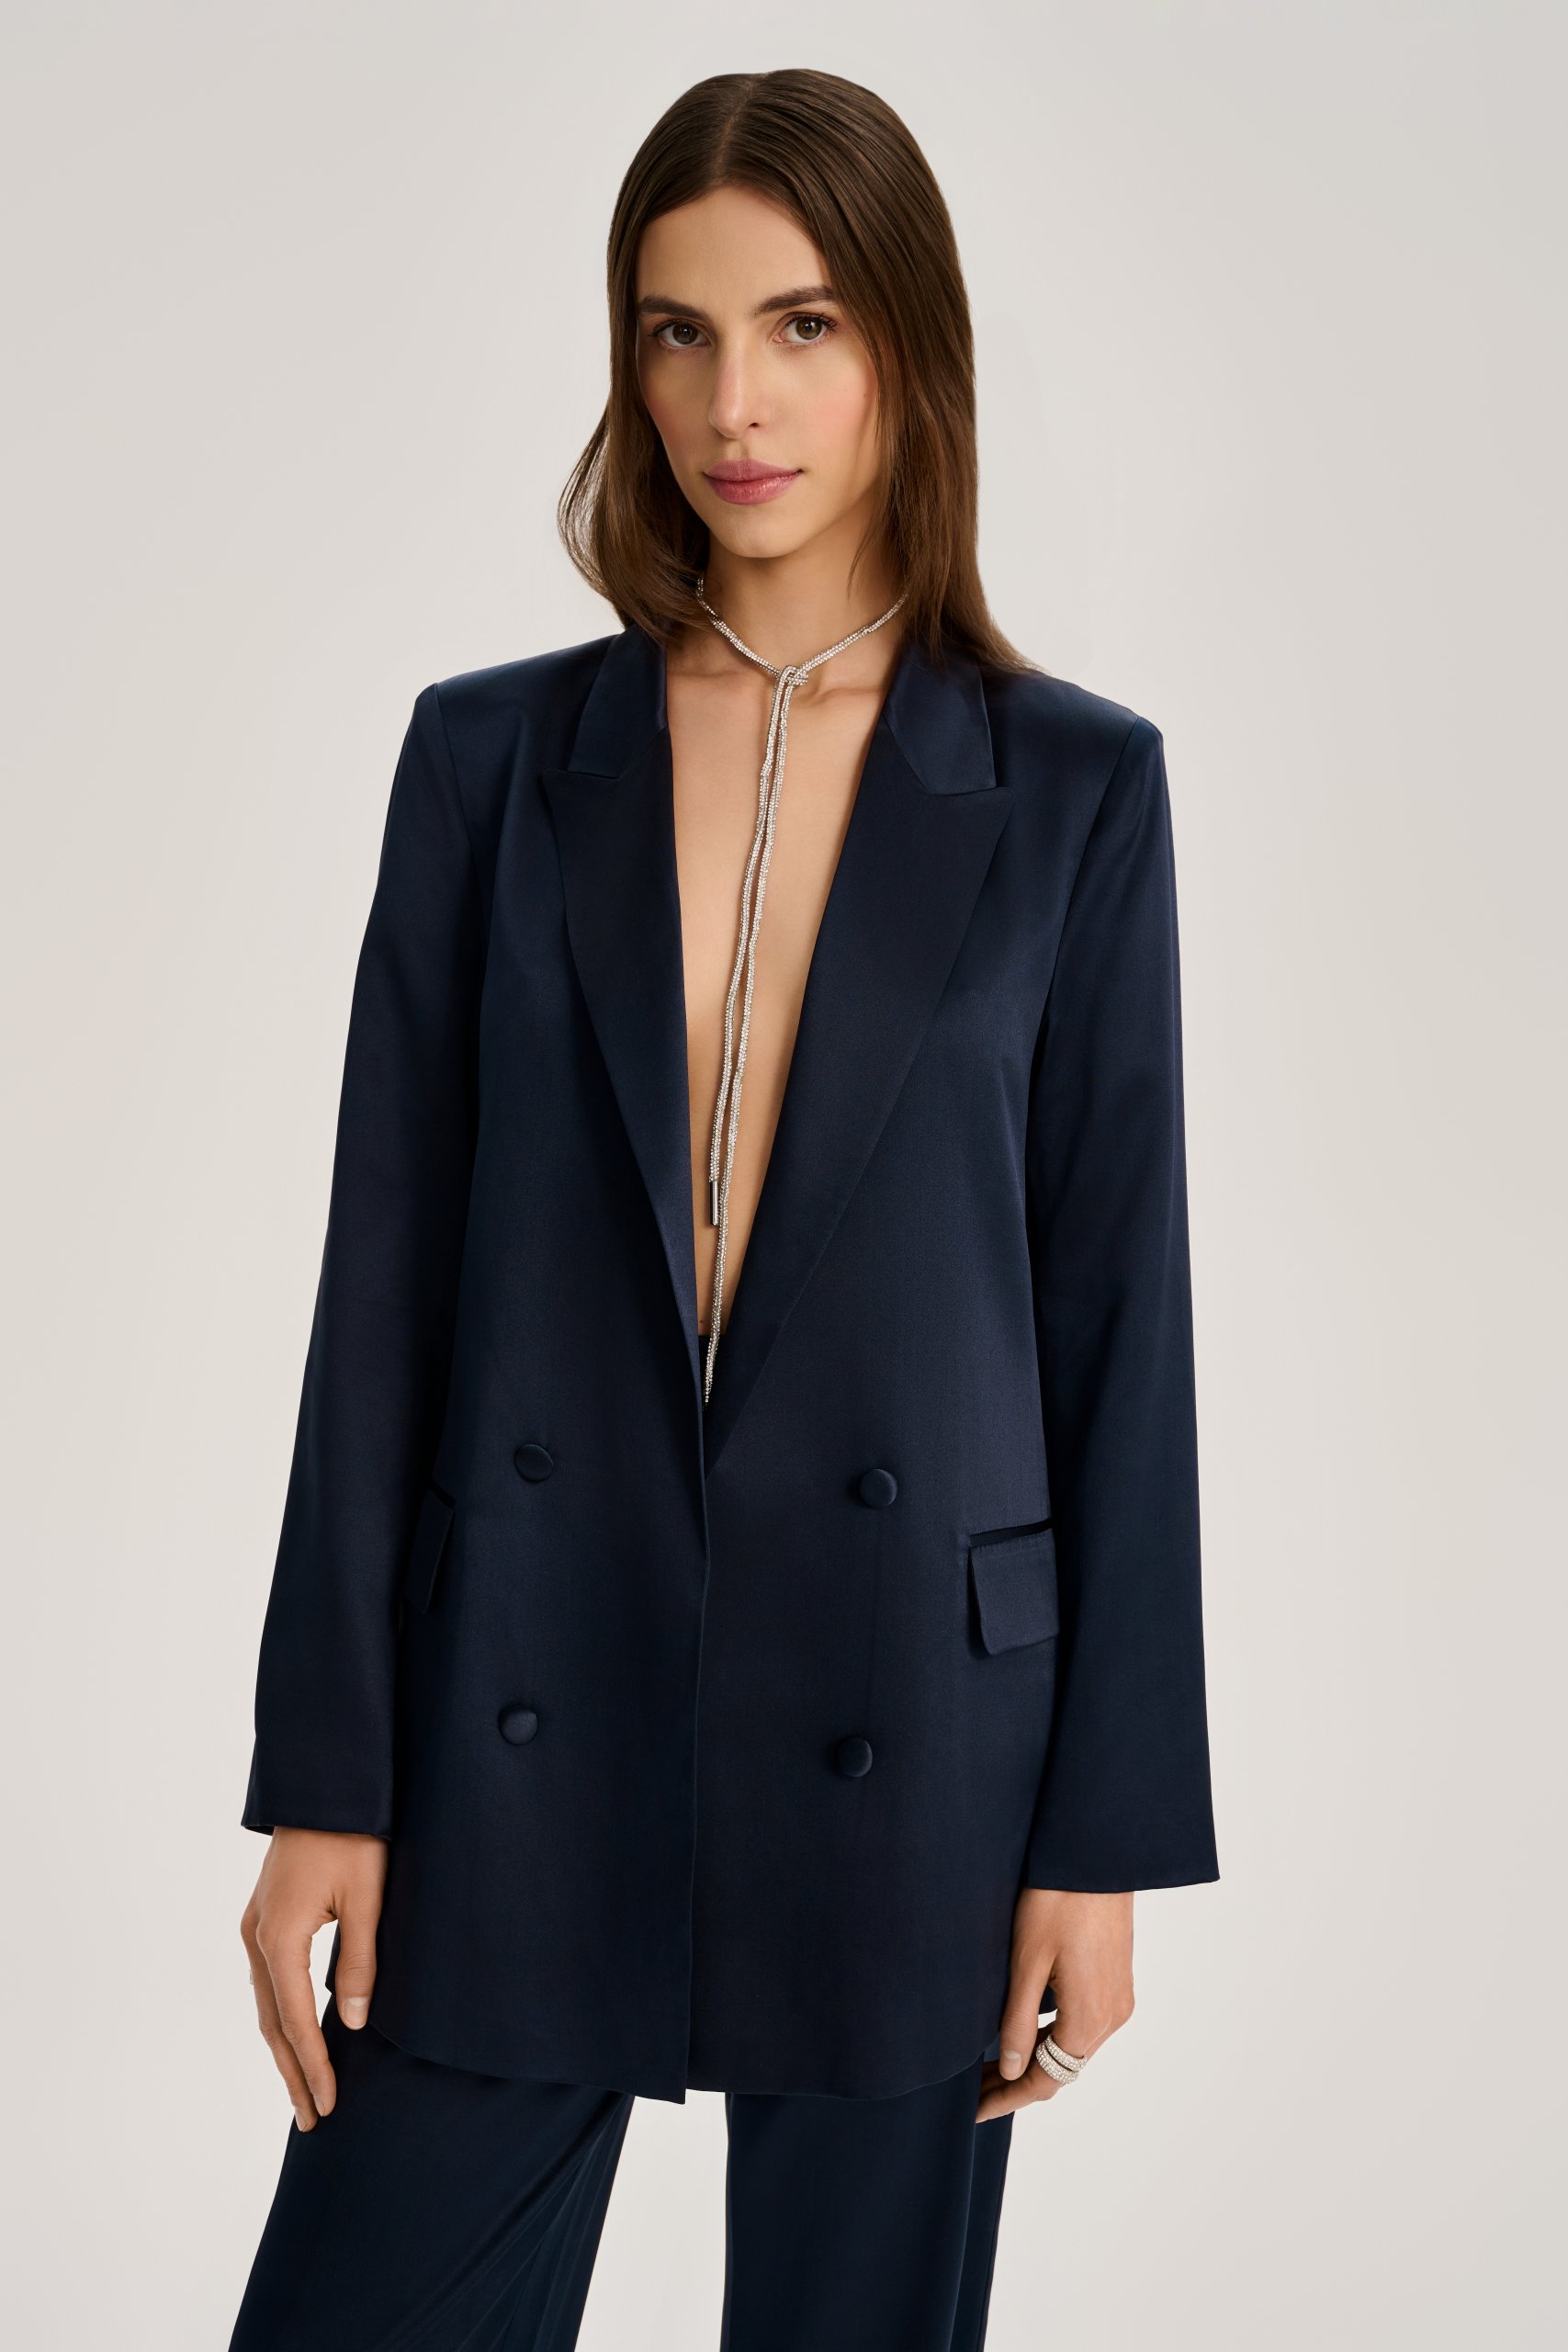 SILK SUIT JACKET FROM THE MOON COLLECTION